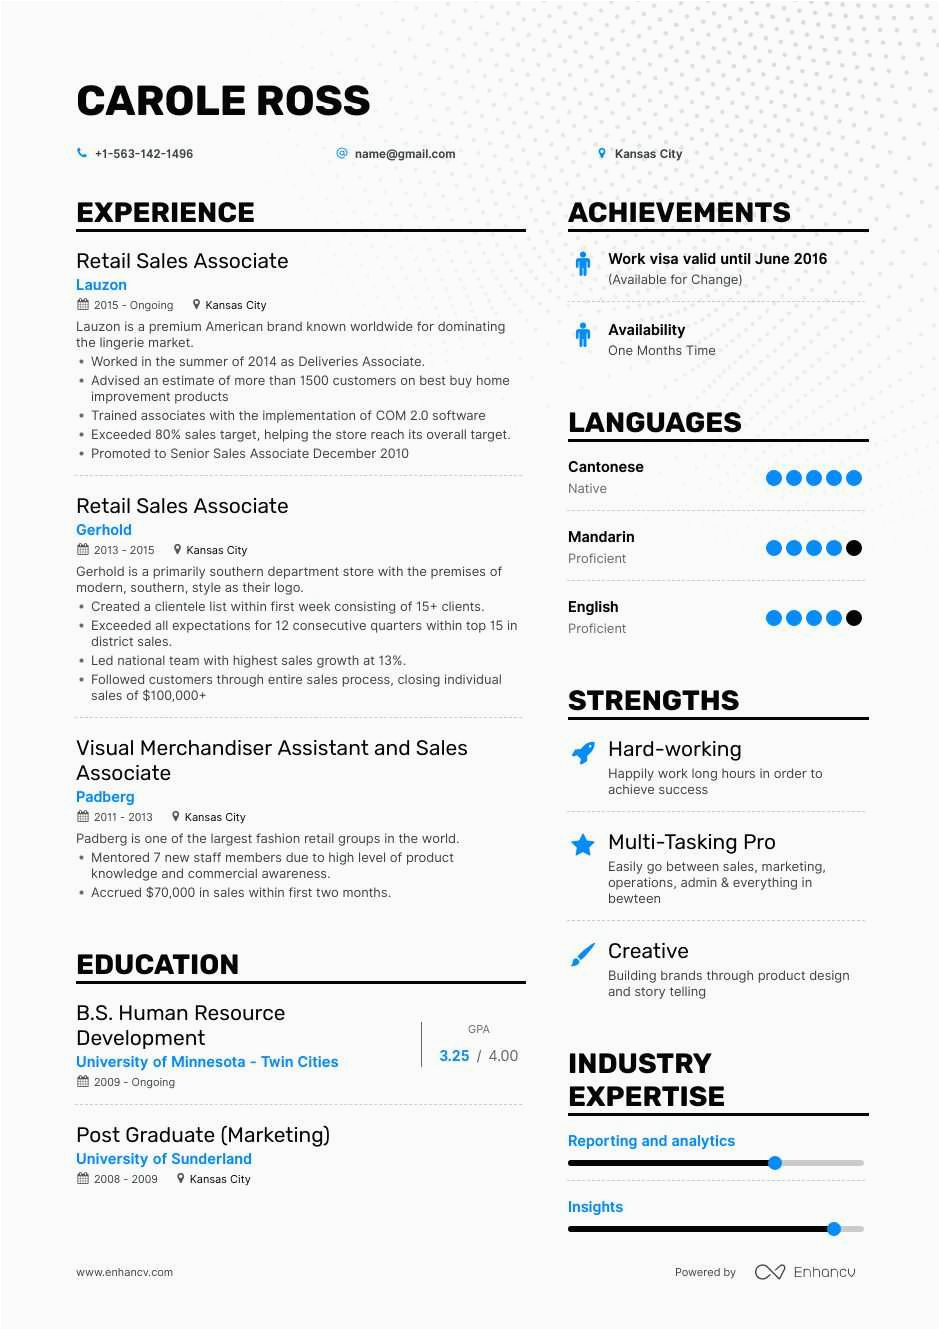 Retail Sales associate Job Resume Sample the Best Retail Sales associate Resume Examples & Skills to Get You Hired